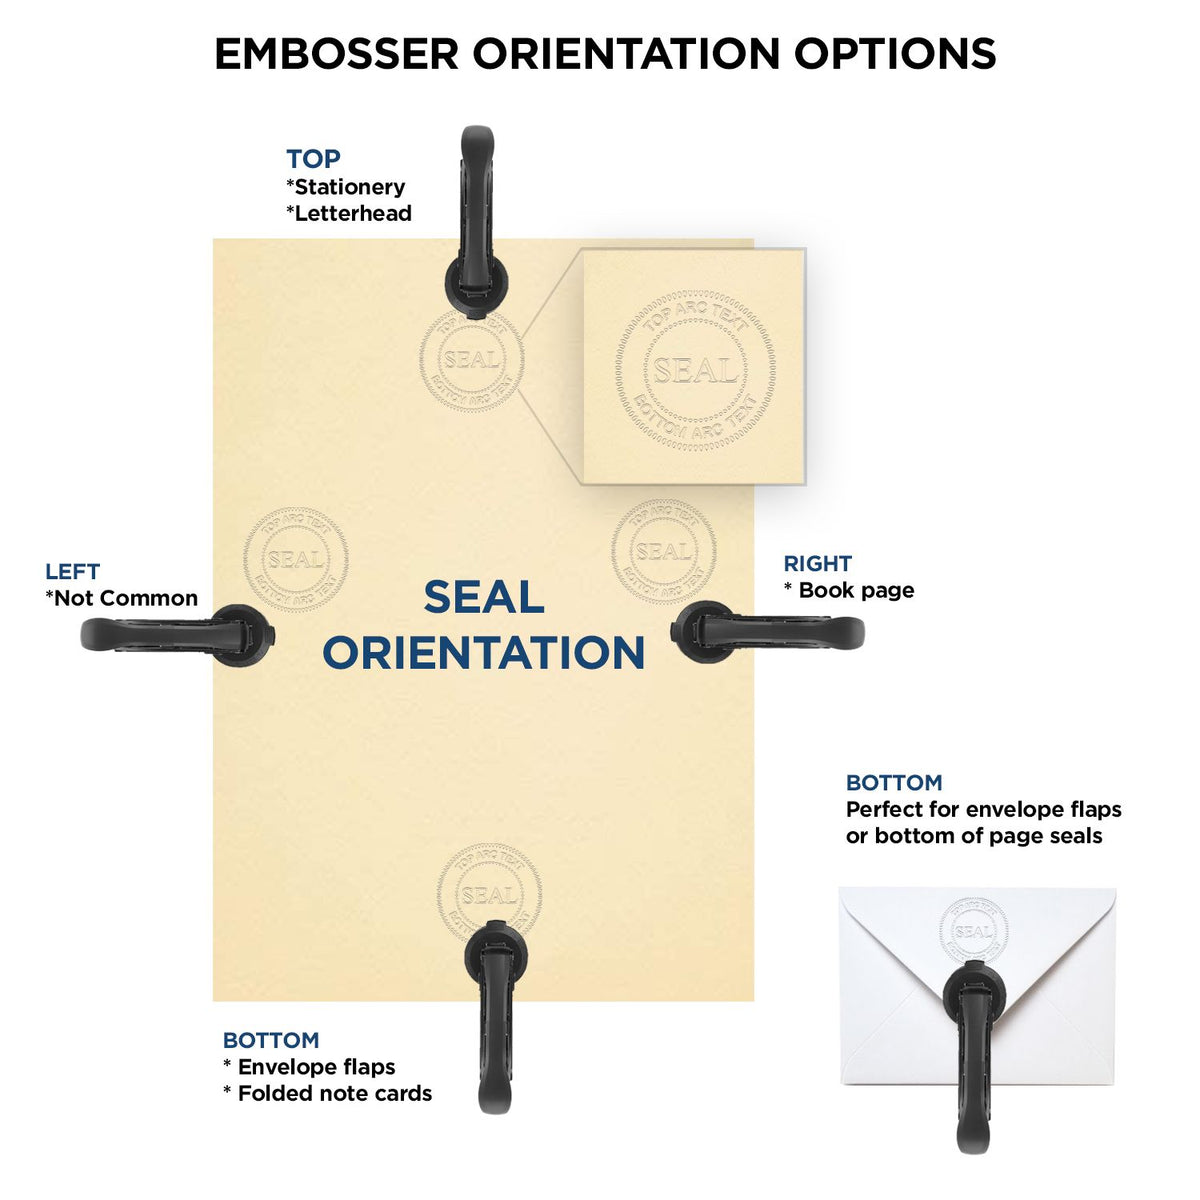 An infographic for the State of Maine Extended Long Reach Engineer Seal showing embosser orientation, this is showing examples of a top, bottom, right and left insert.